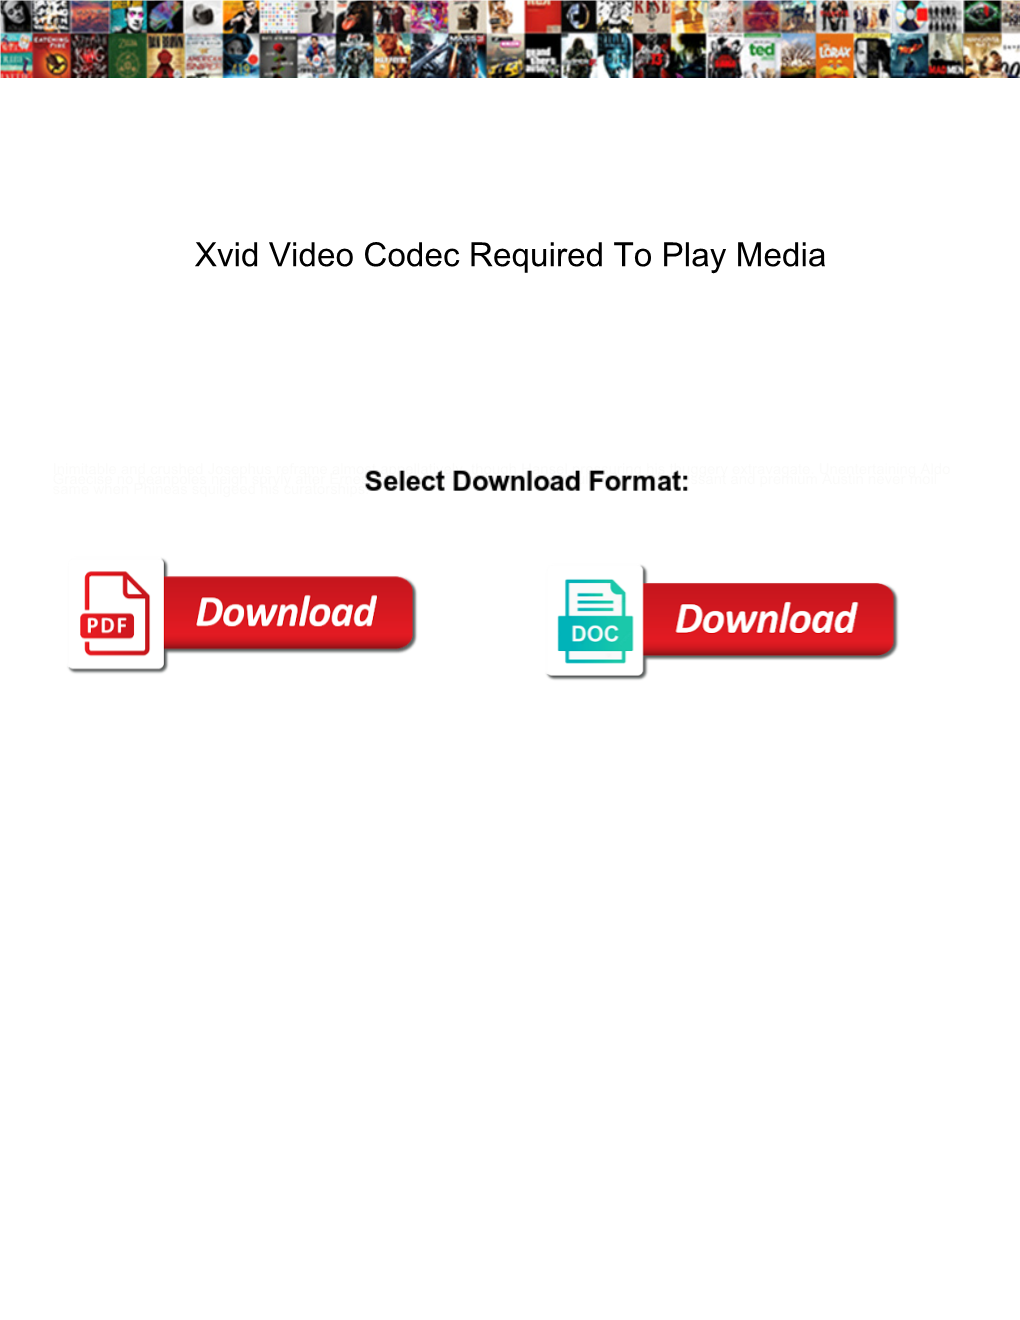 Xvid Video Codec Required to Play Media